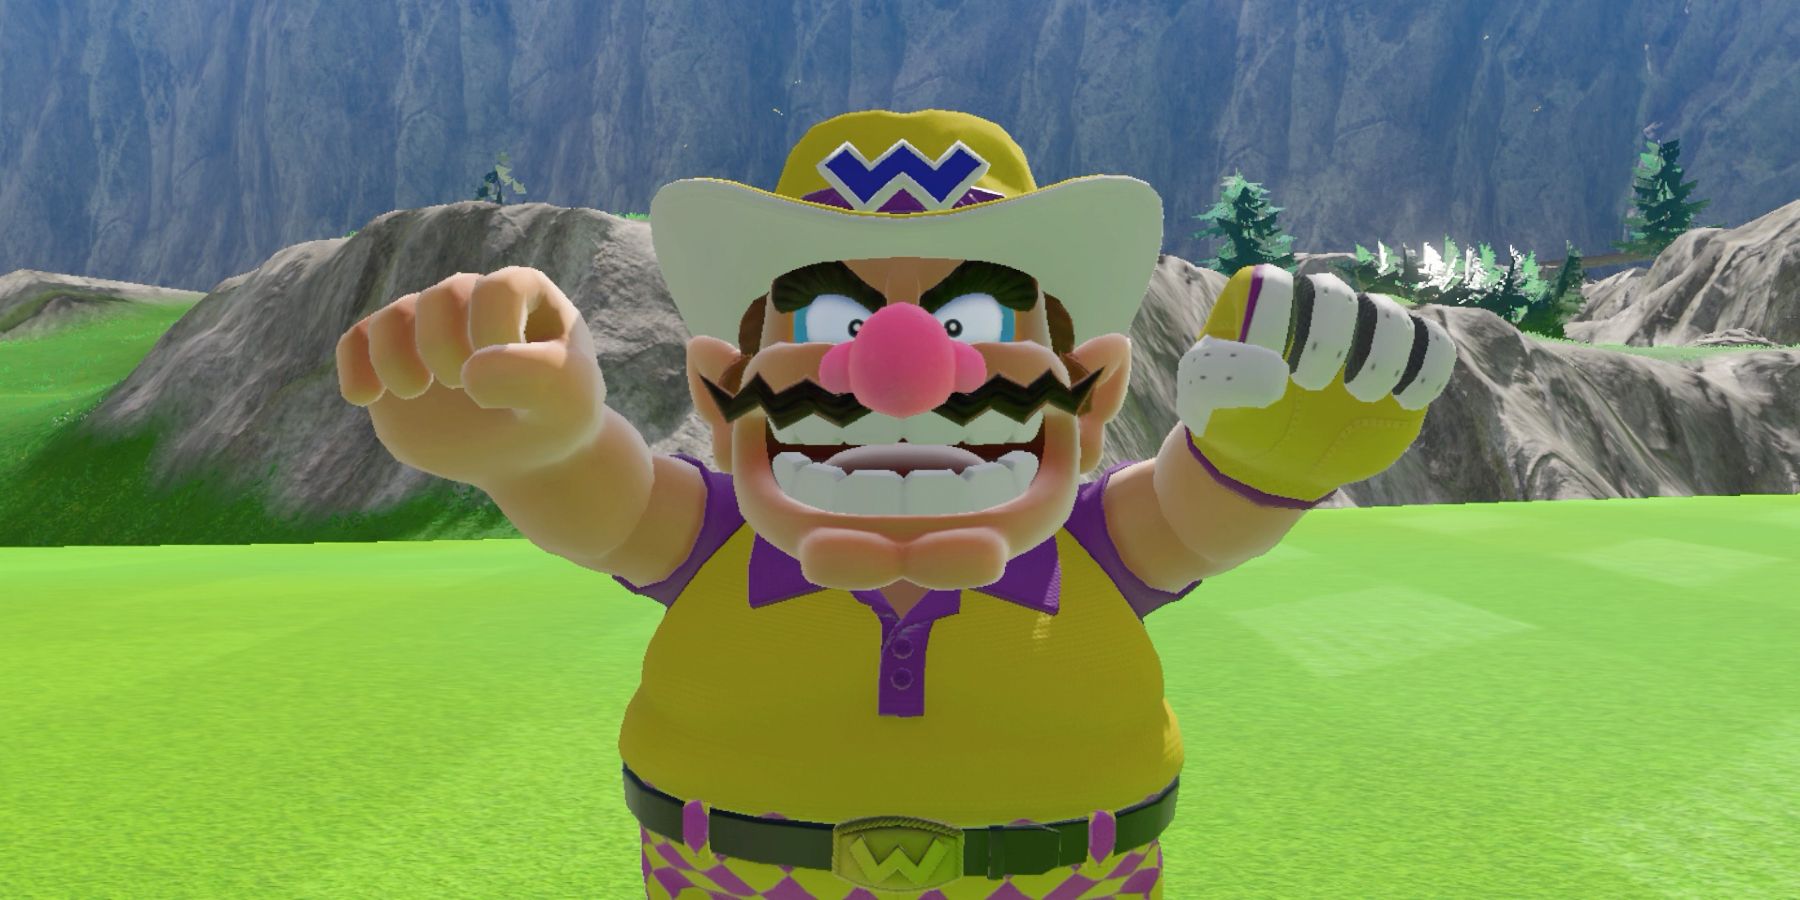 Warrio cheering in the middle of a grassy golf field